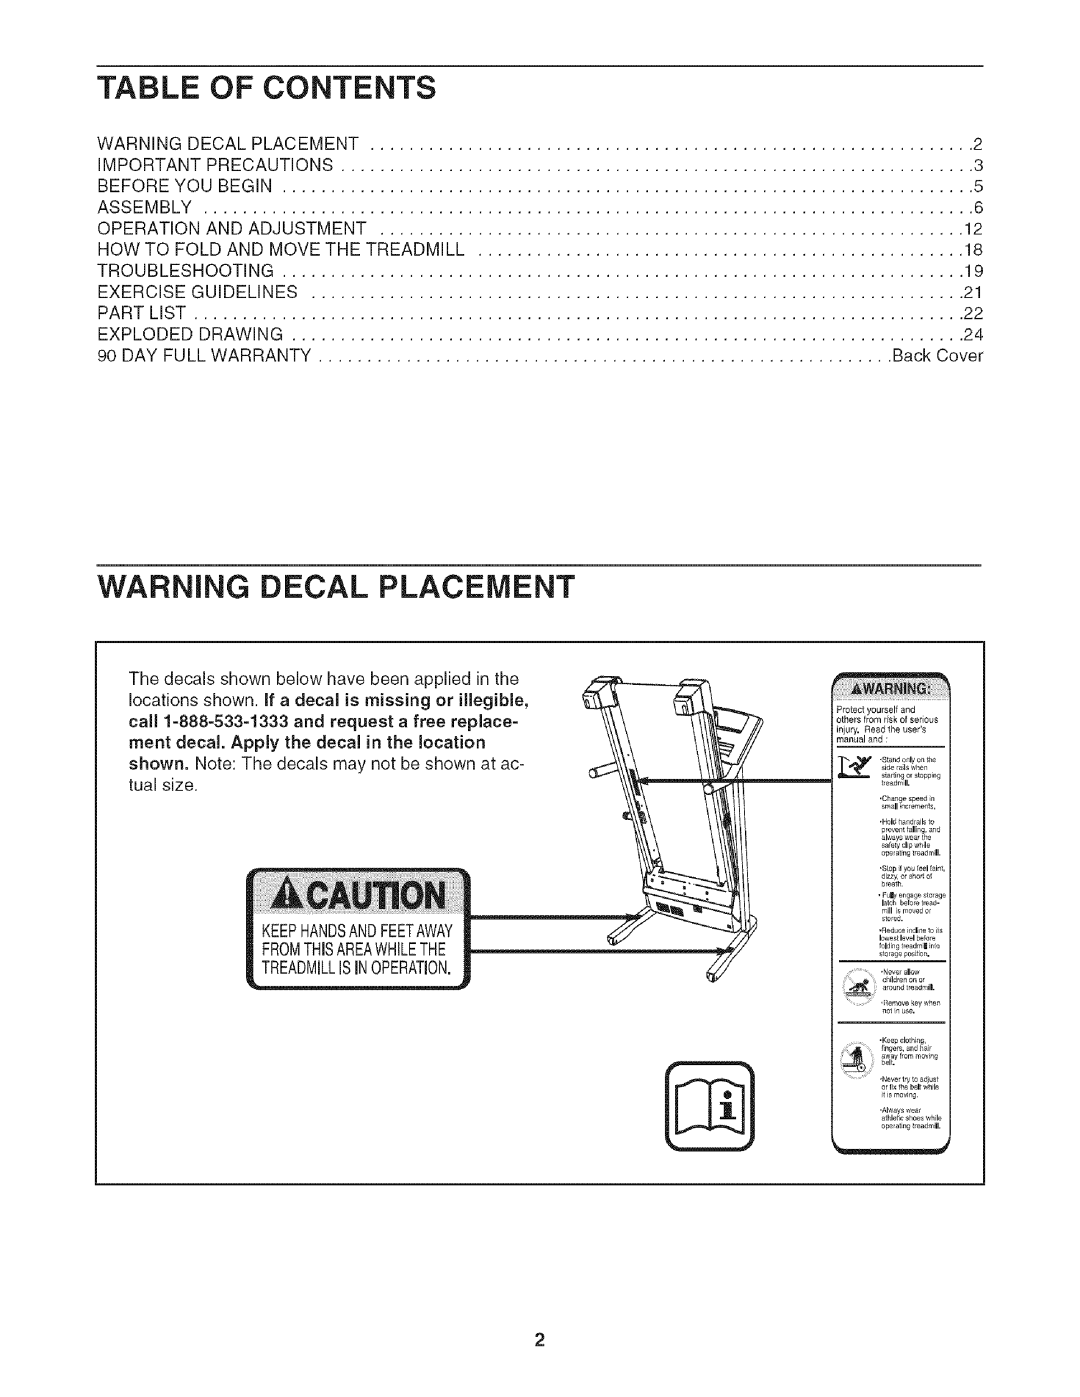 Sears 831.24733.0 user manual Of Contents, Warning Decal Placement 